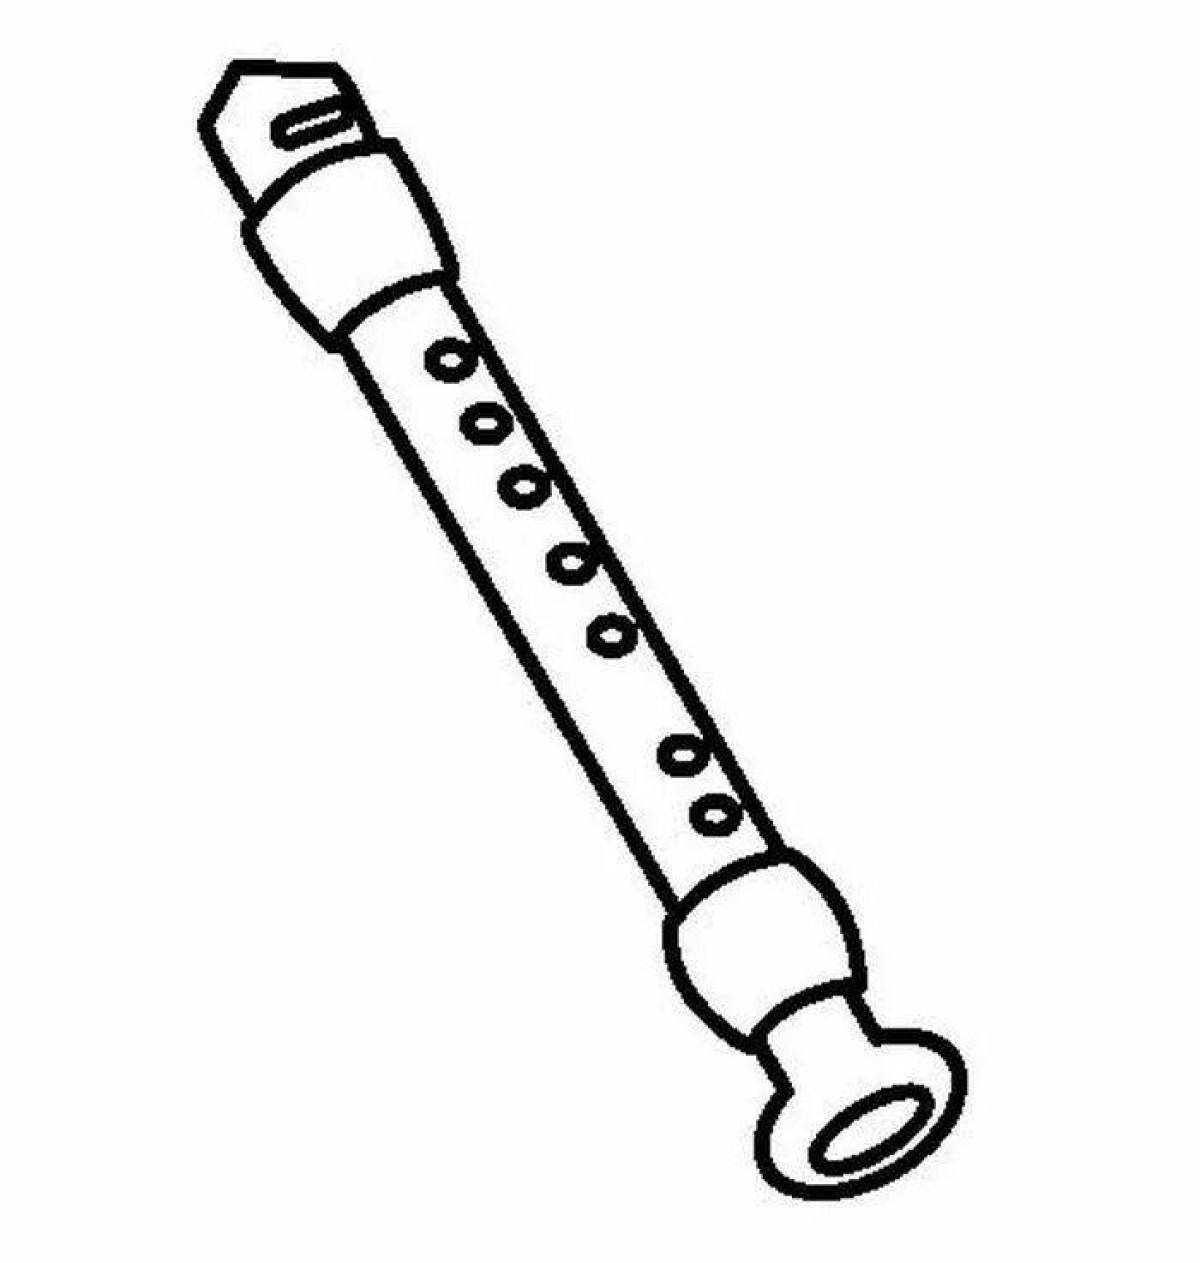 Playful flute coloring page